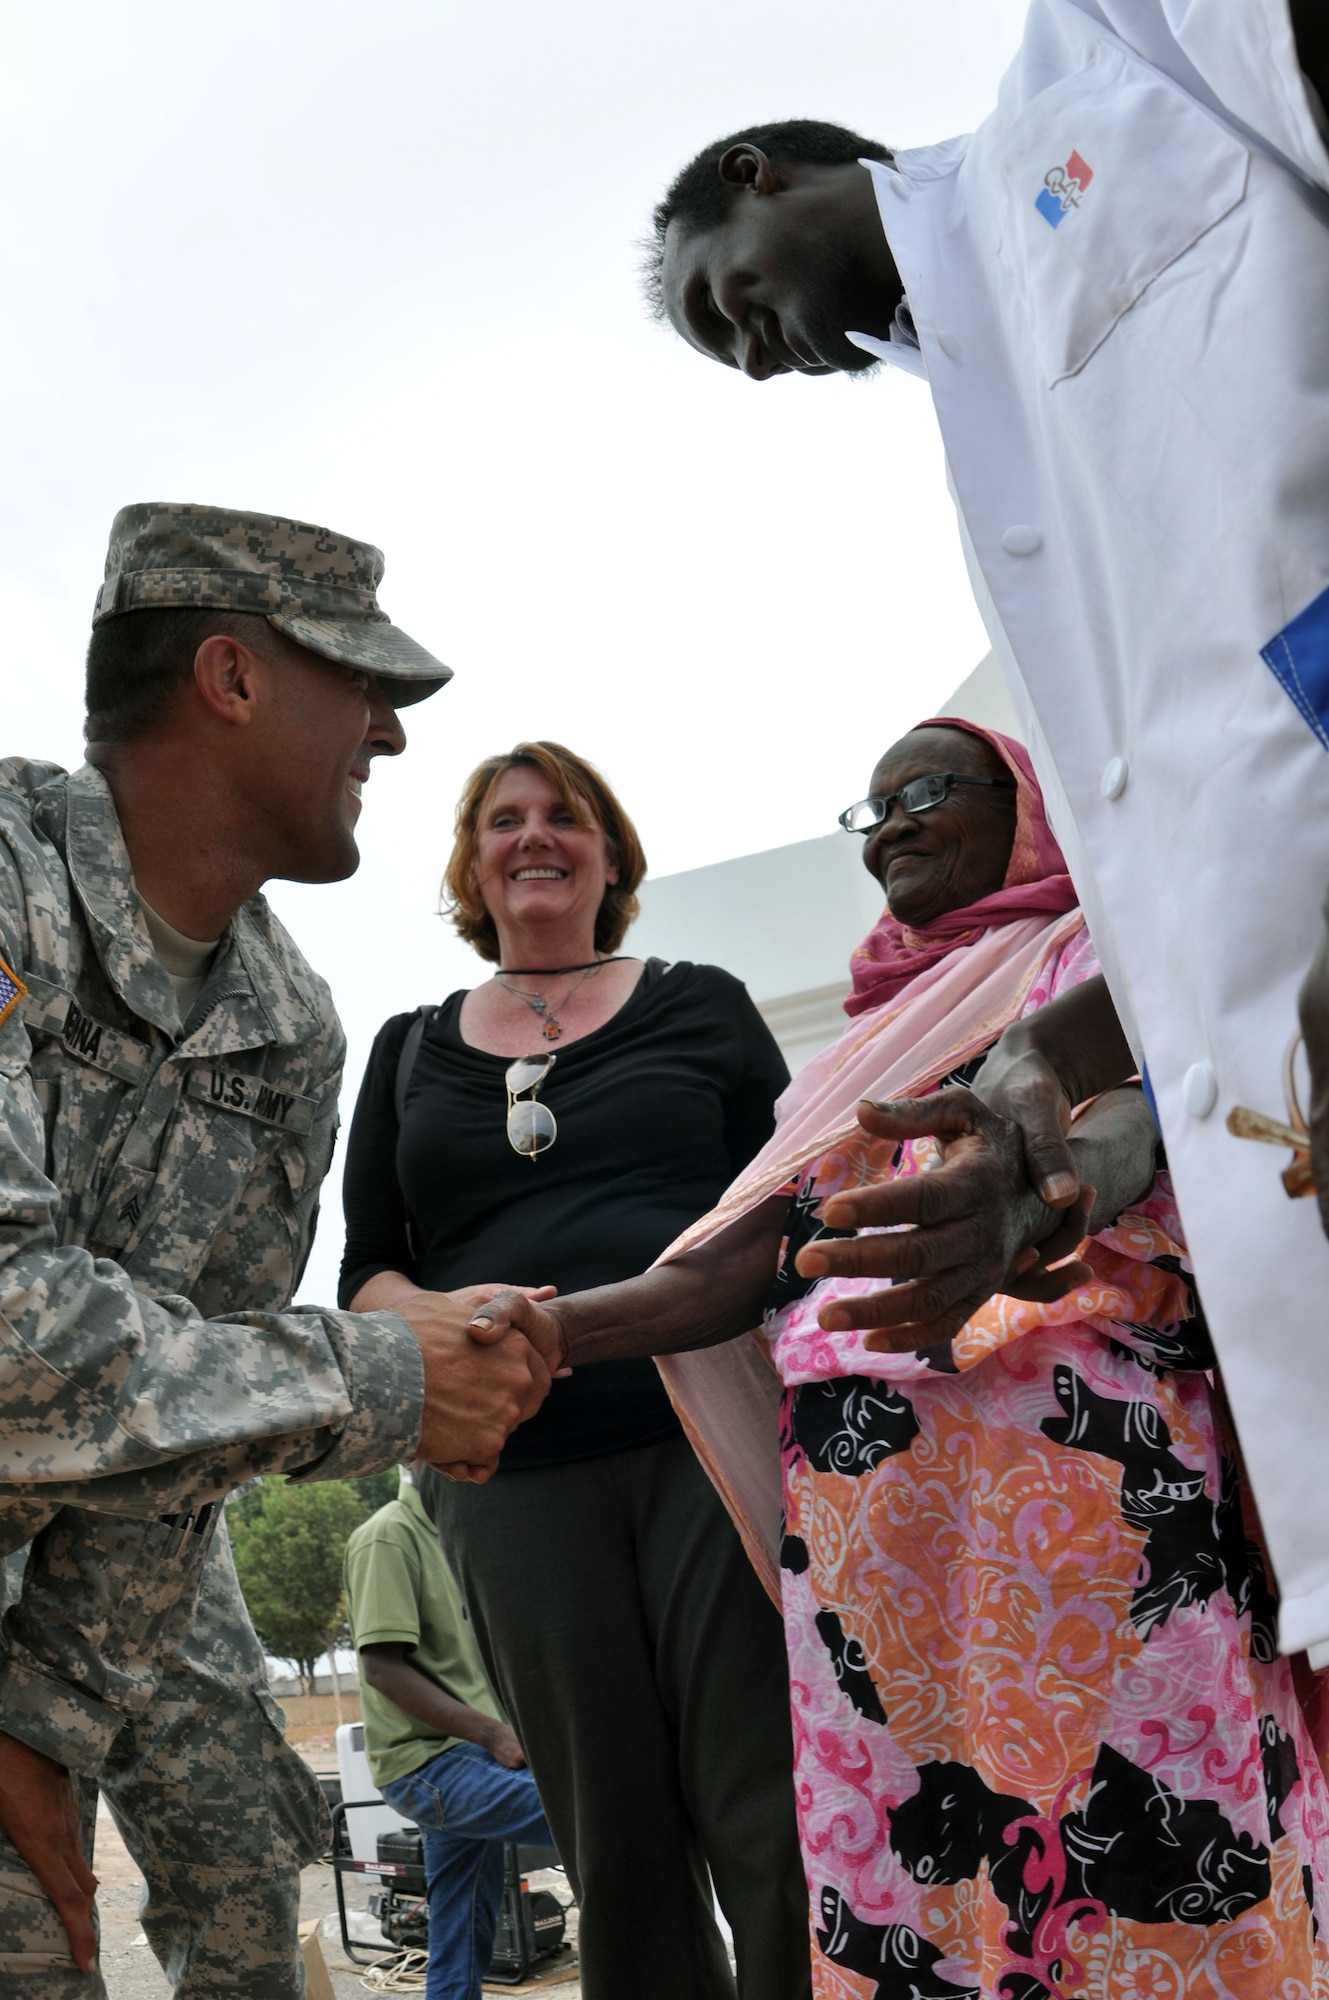 OBOCK, Djibouti - U.S. Army Sgt. Noel Medina escorts a patient who received new prescription eyeglasses during a recent Medical Capacity Program (MEDCAP) mission, May 5. Optometrists attached to Combined Joint Task Force – Horn of Africa (CJTF-HOA) performed vision wellness checks and provided prescription glasses to patients requiring eyesight correction. The MECAP also hosted dental and preventative care, and involved Djiboutian Health Ministry personnel, local care providers and 20 members of the JTF-HOA’s 402nd Civil Affairs Battalion. (U.S. Air Force photo by Lt. Col. Leslie Pratt)